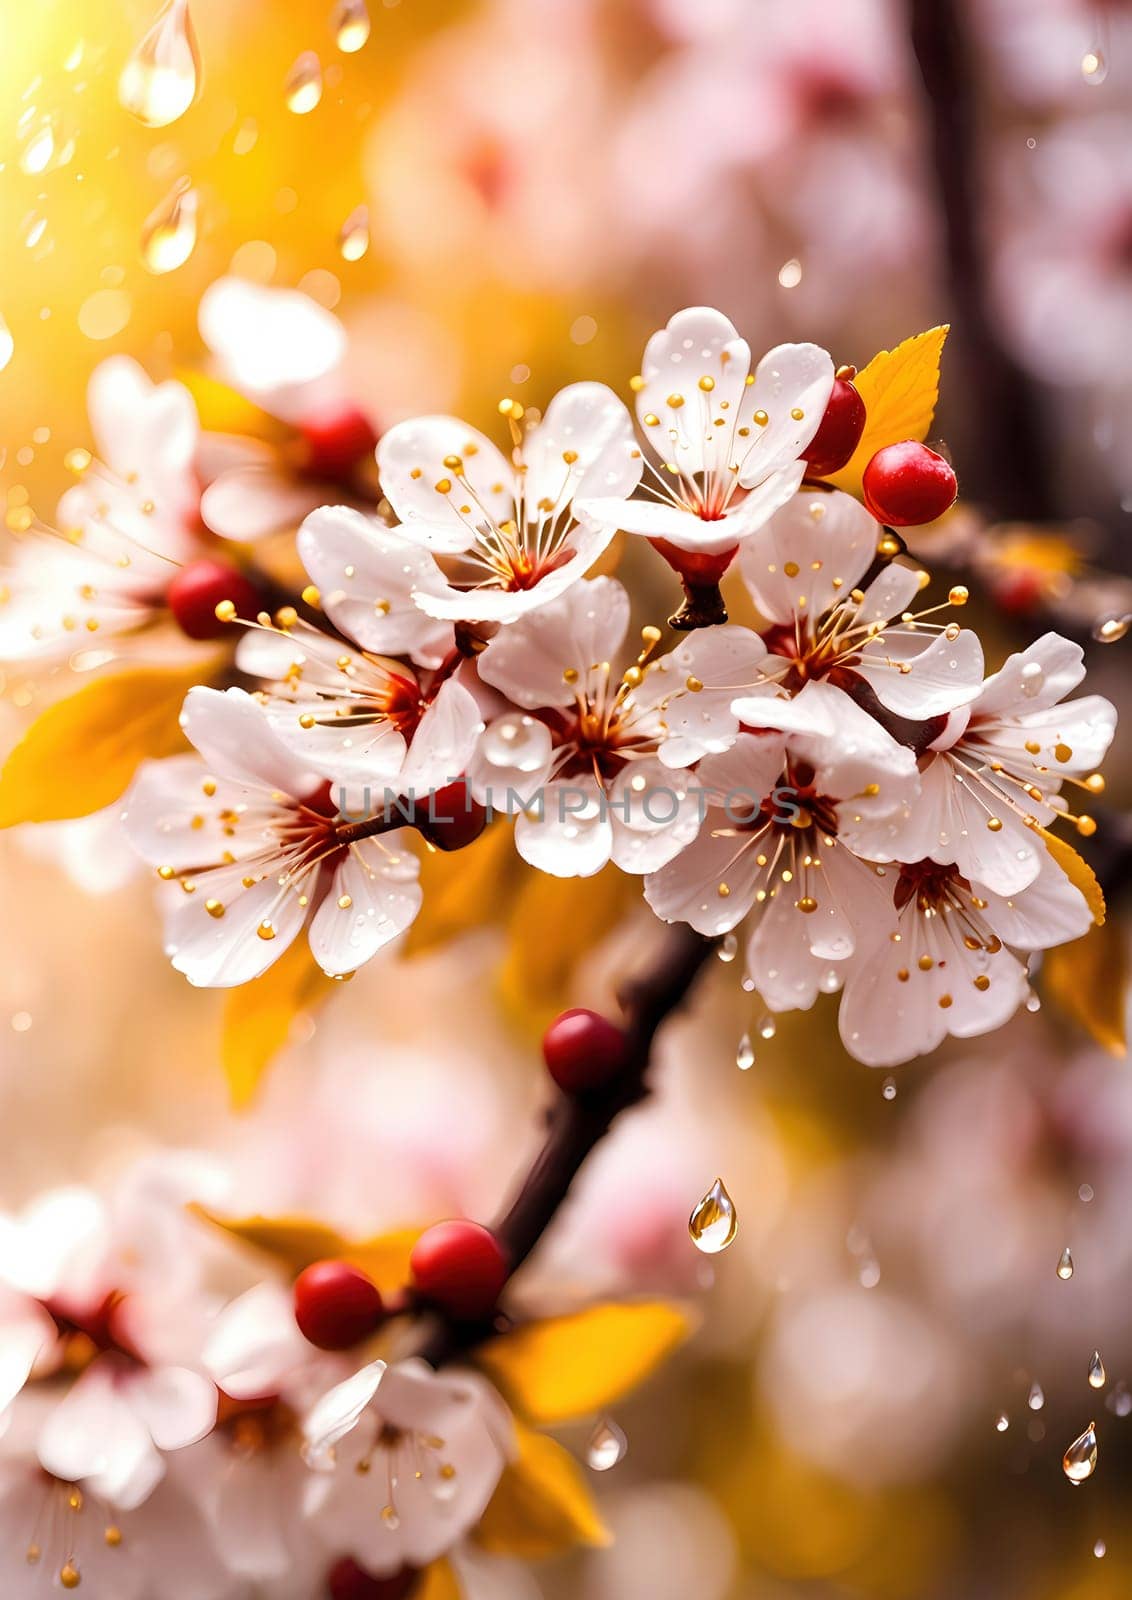 there are many drops of water on the flowers of the tree, beautiful wallpaper, golden motif, falling pedals of cherry blossom, sun.drops like yellow gems, in radiation connection, cherries, mists, Generate AI